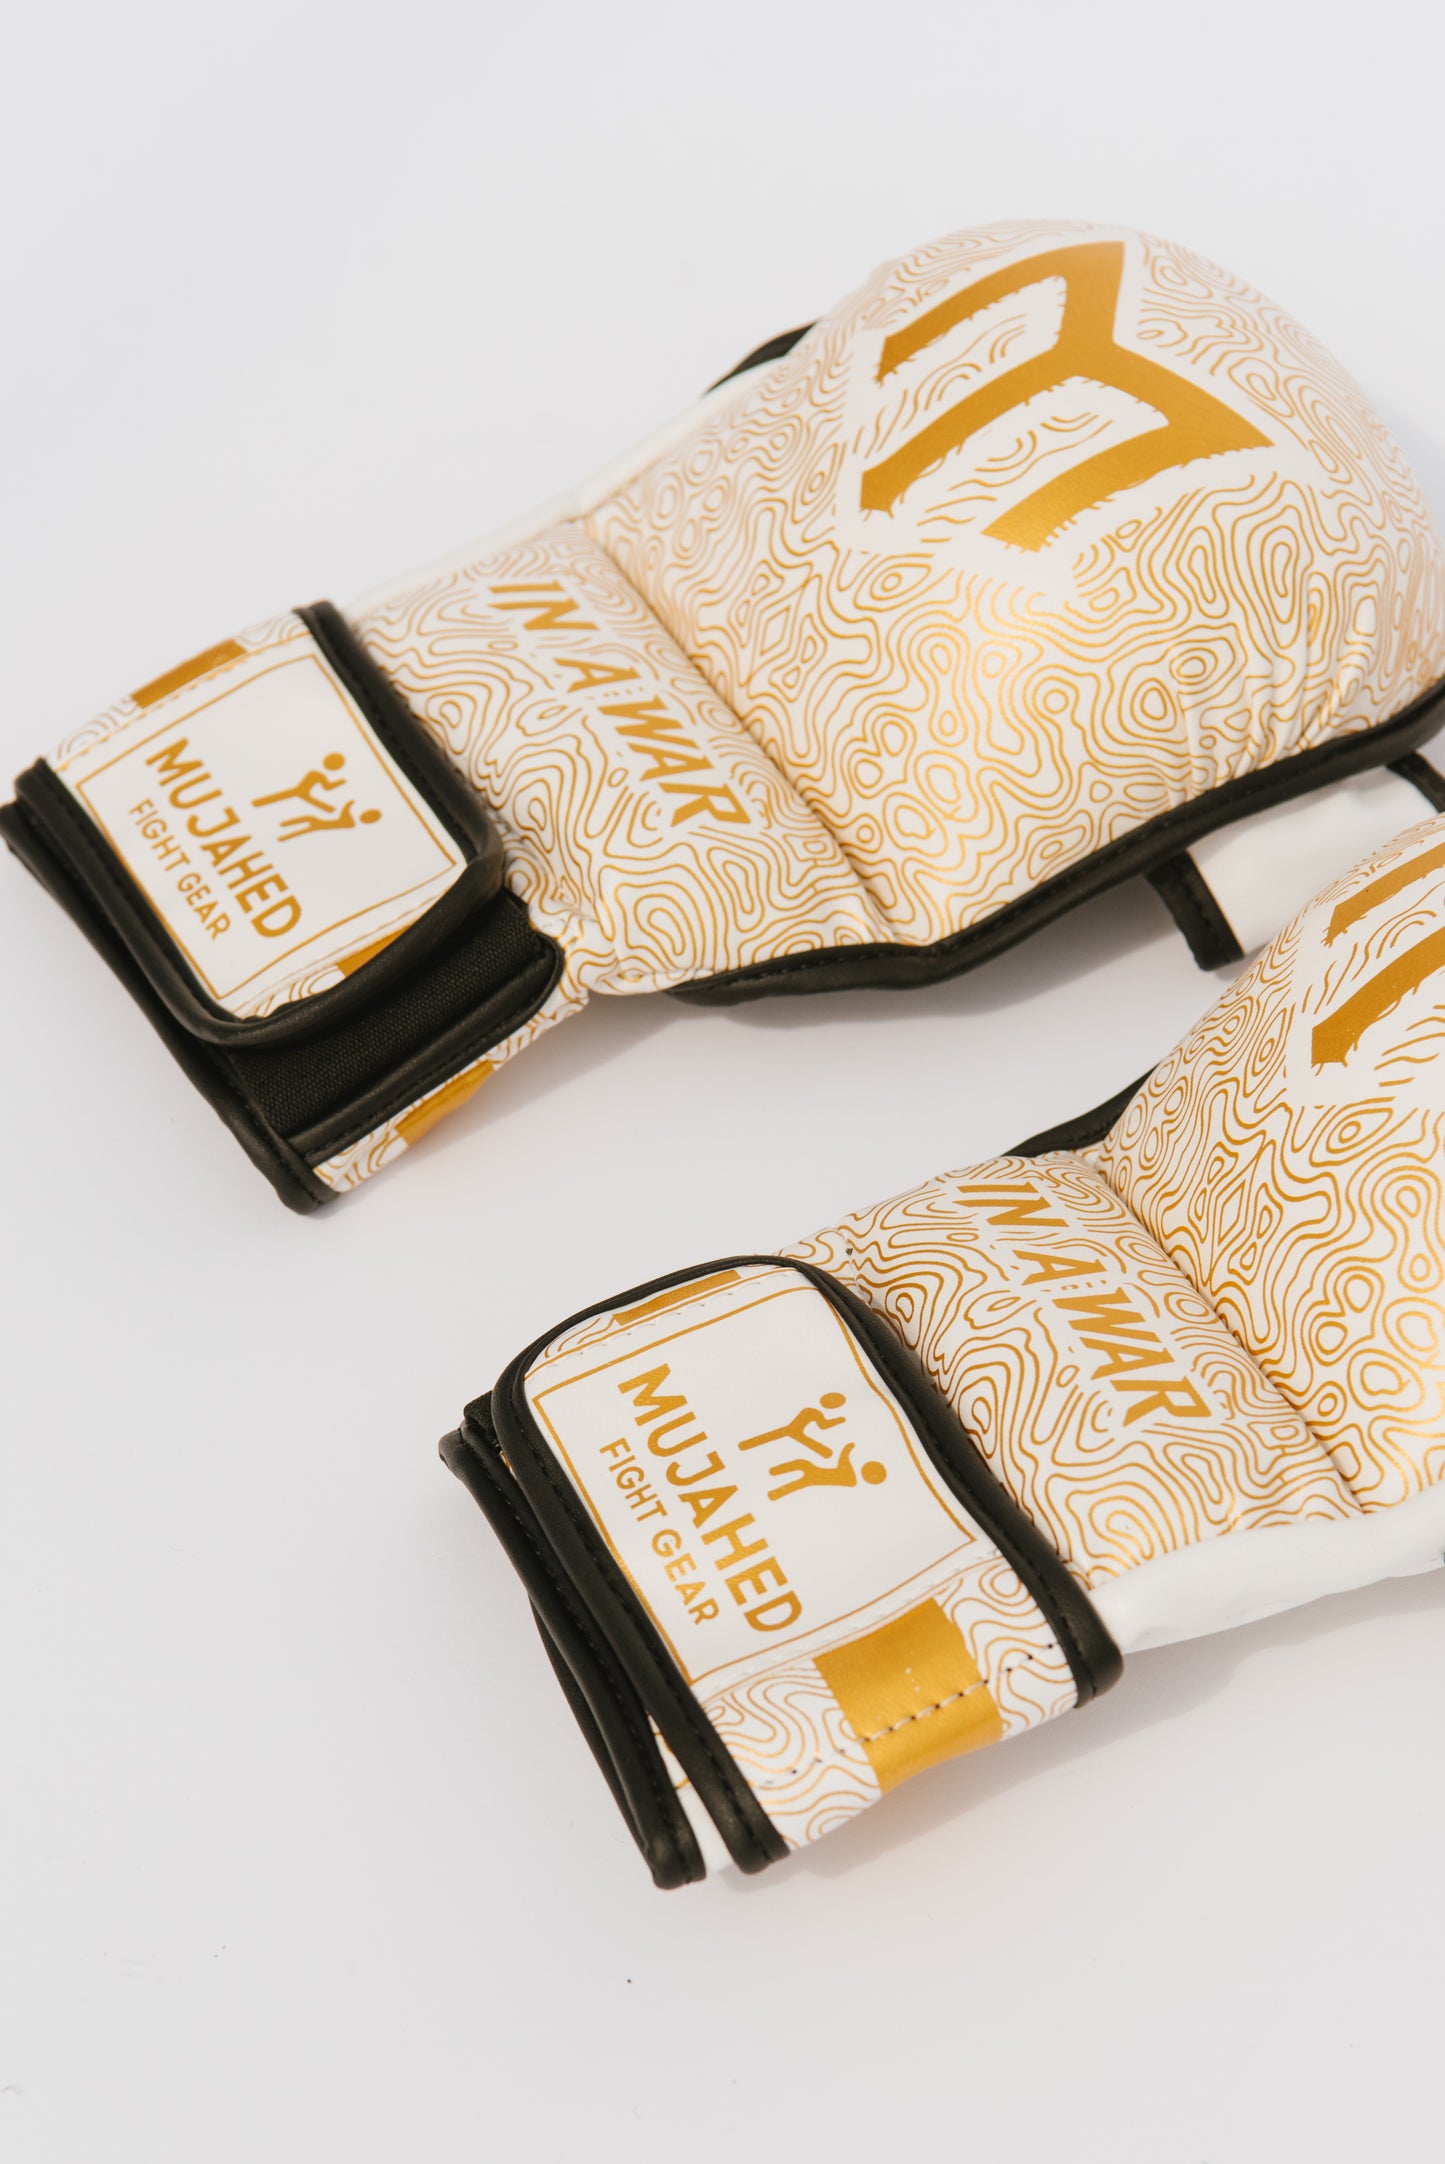 Mujahed MMA gloves